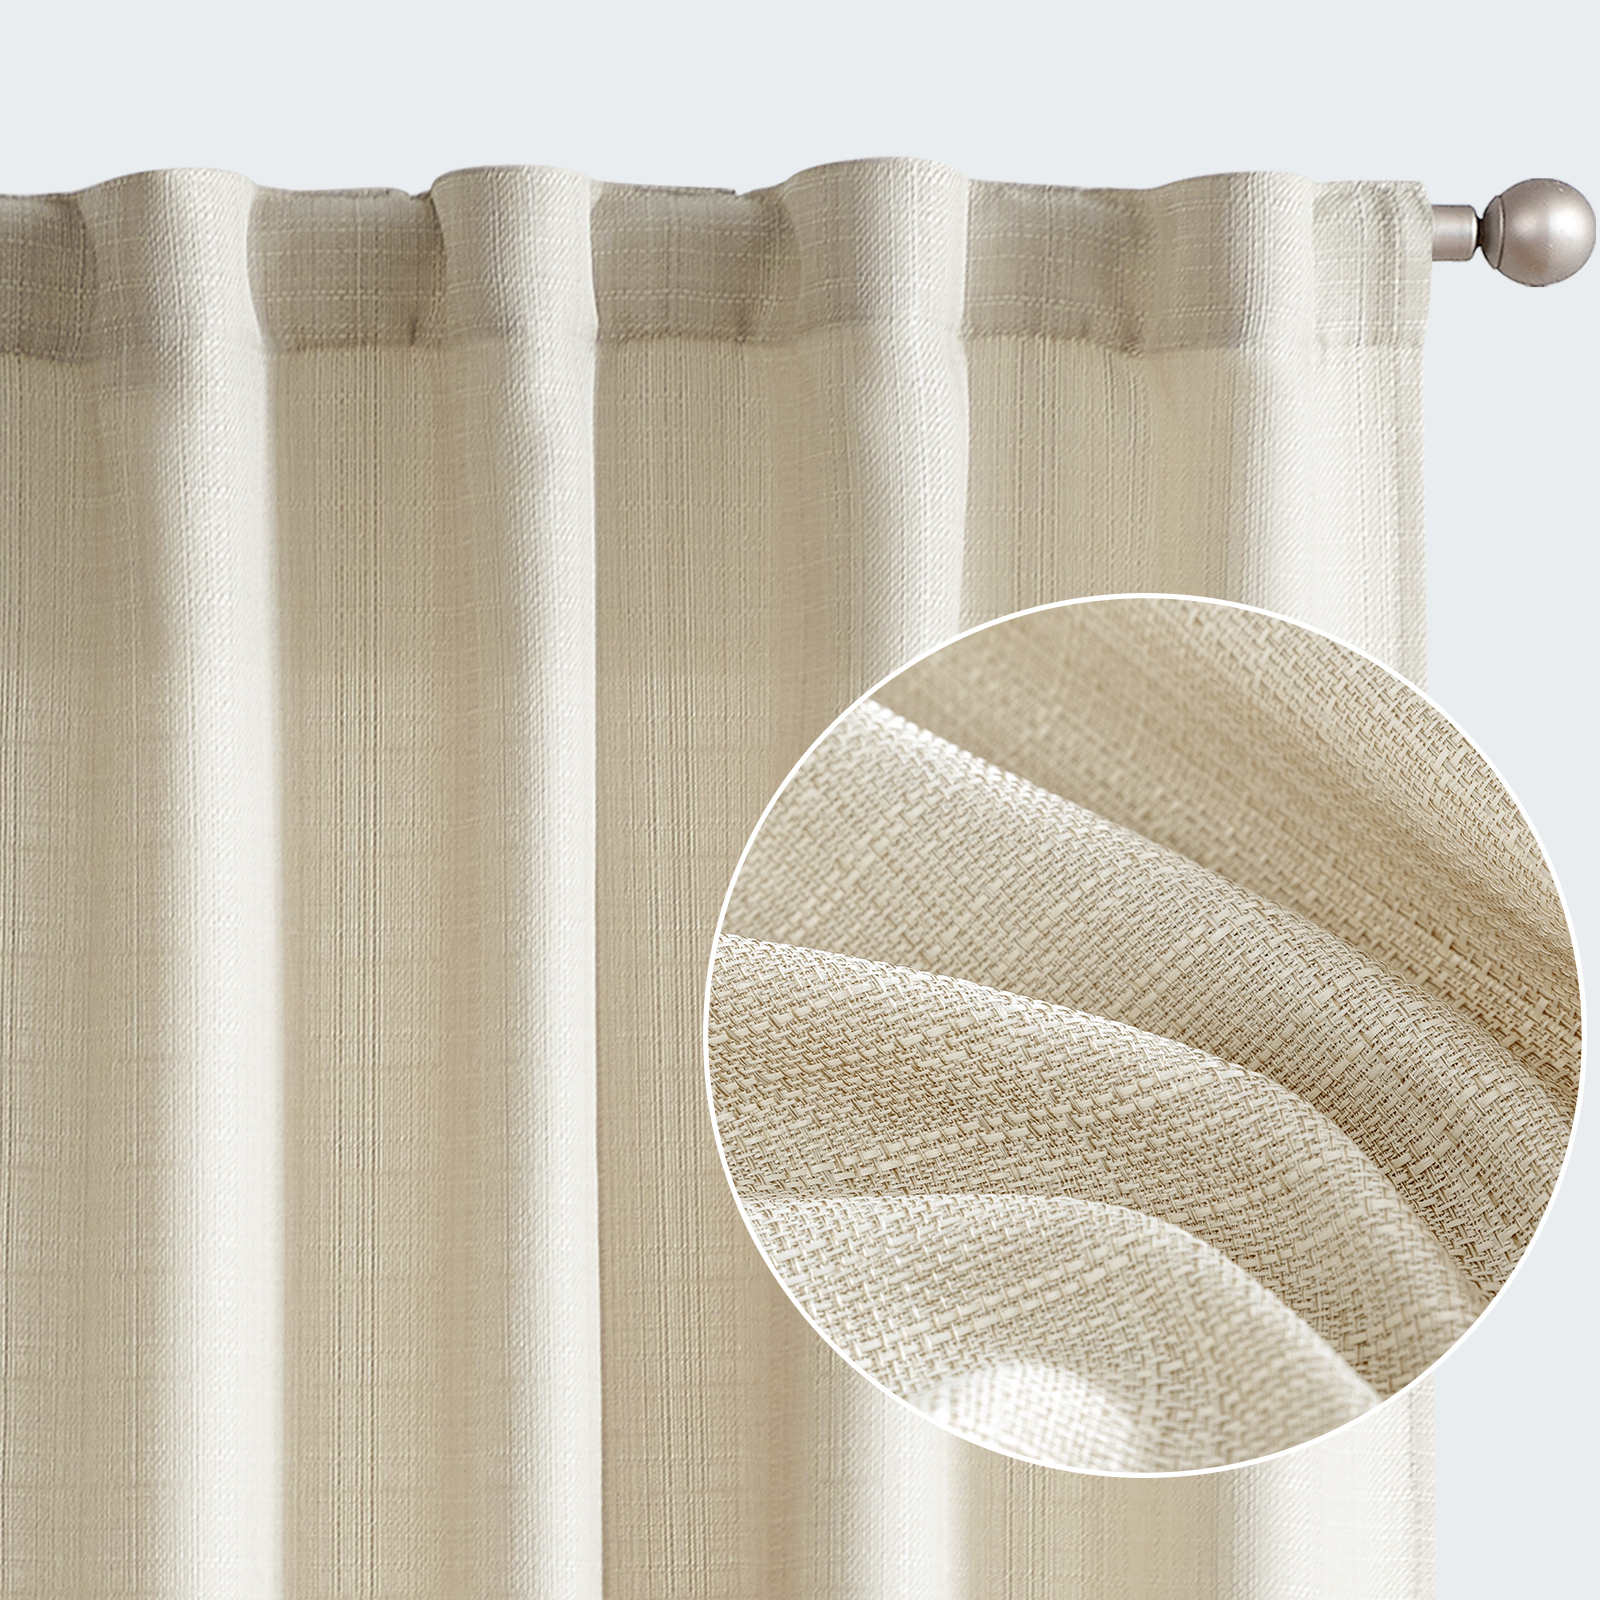 Curtainking Heathered Beige Curtains for Living Room 63 Inches Linen Textured Curtains Light Filtering Back Tab Curtains Casual Weave Back Tab Drapes 2 Panels - image 1 of 8